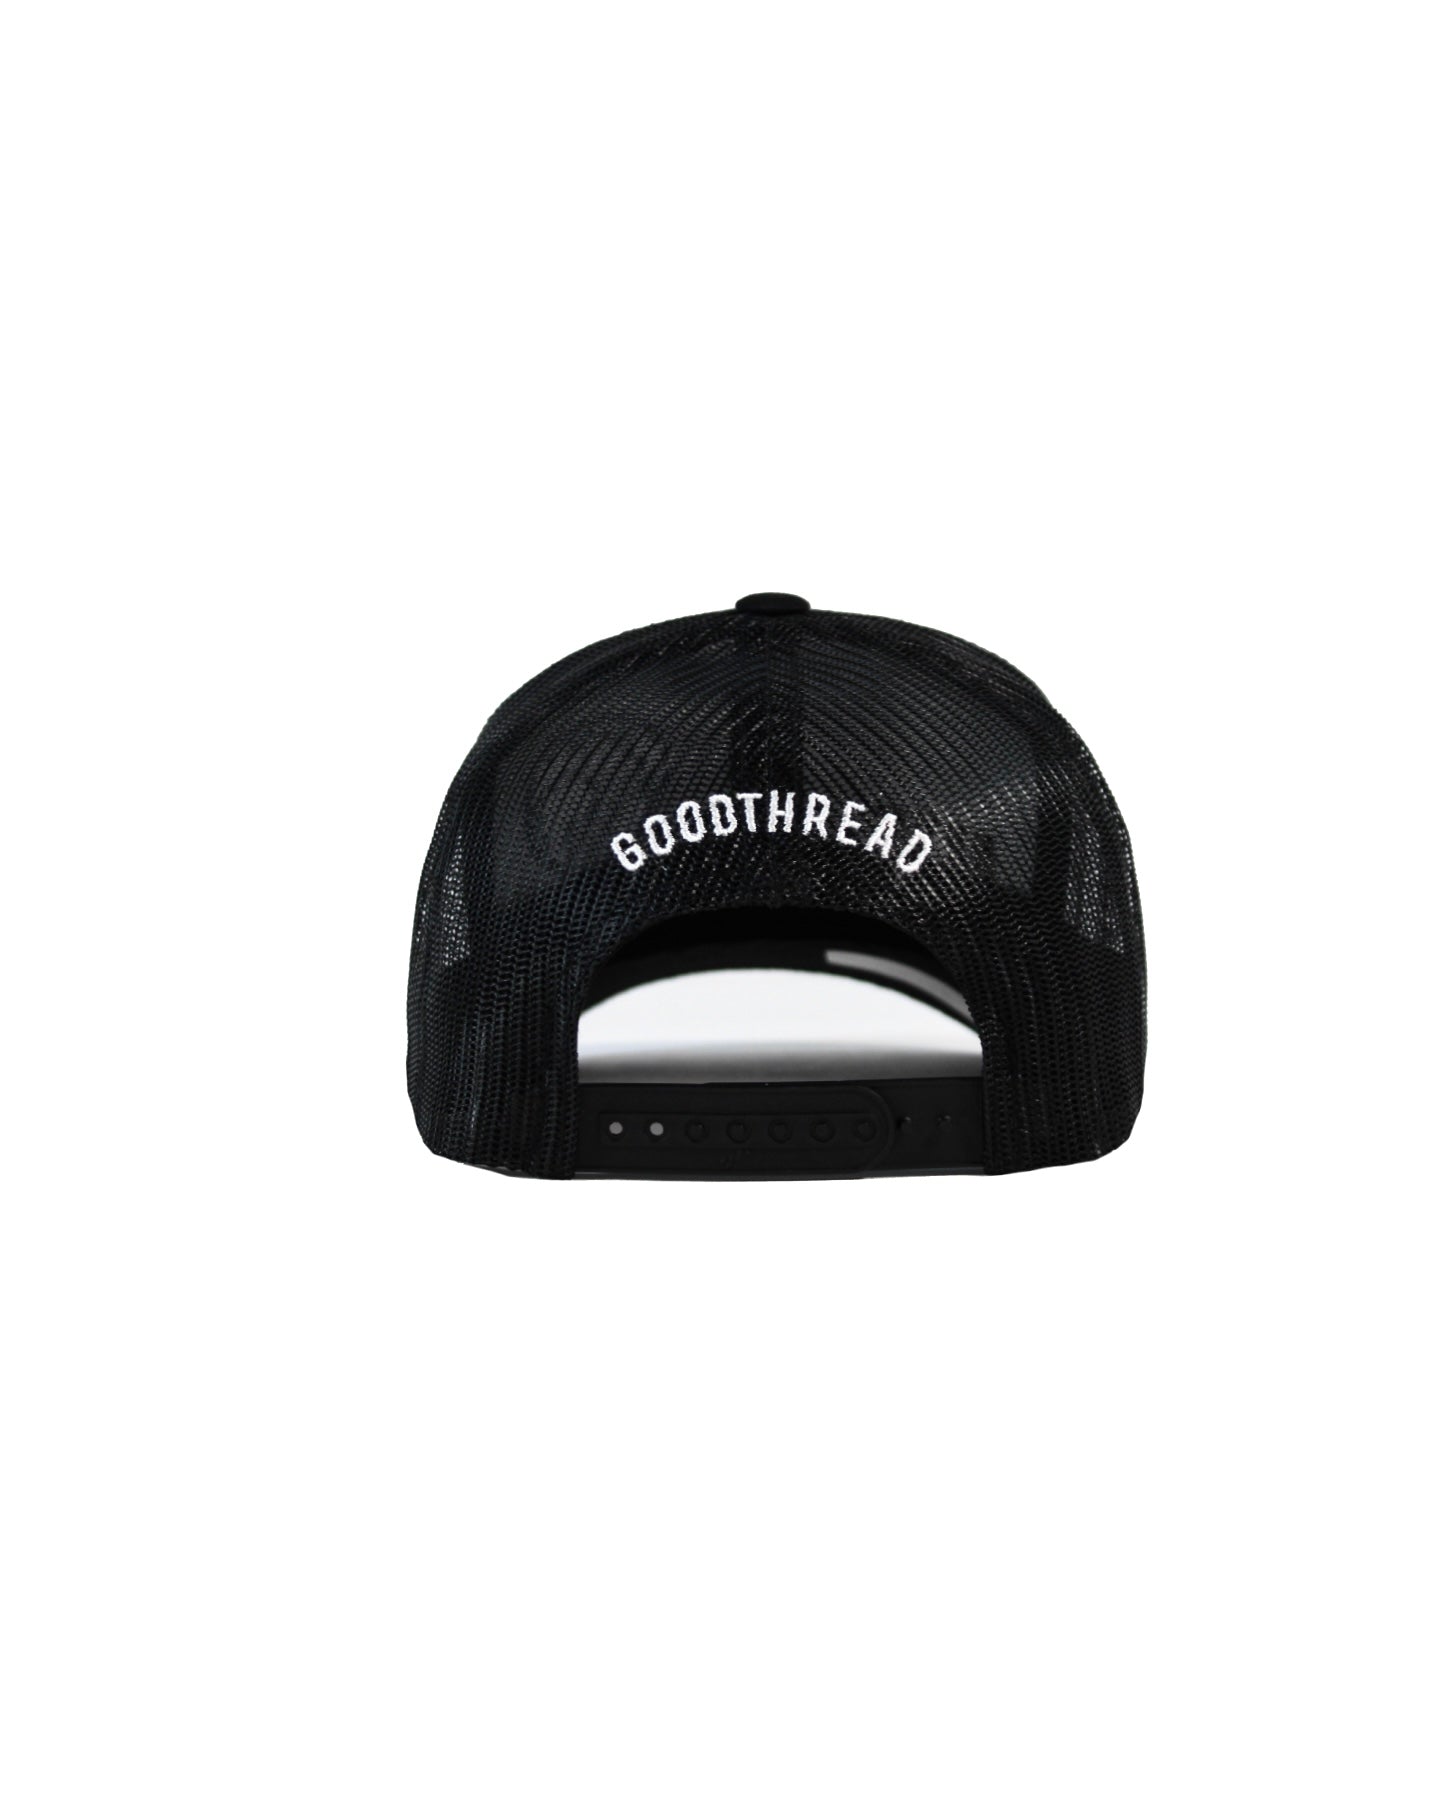 GT NY World Mesh Curved Hat